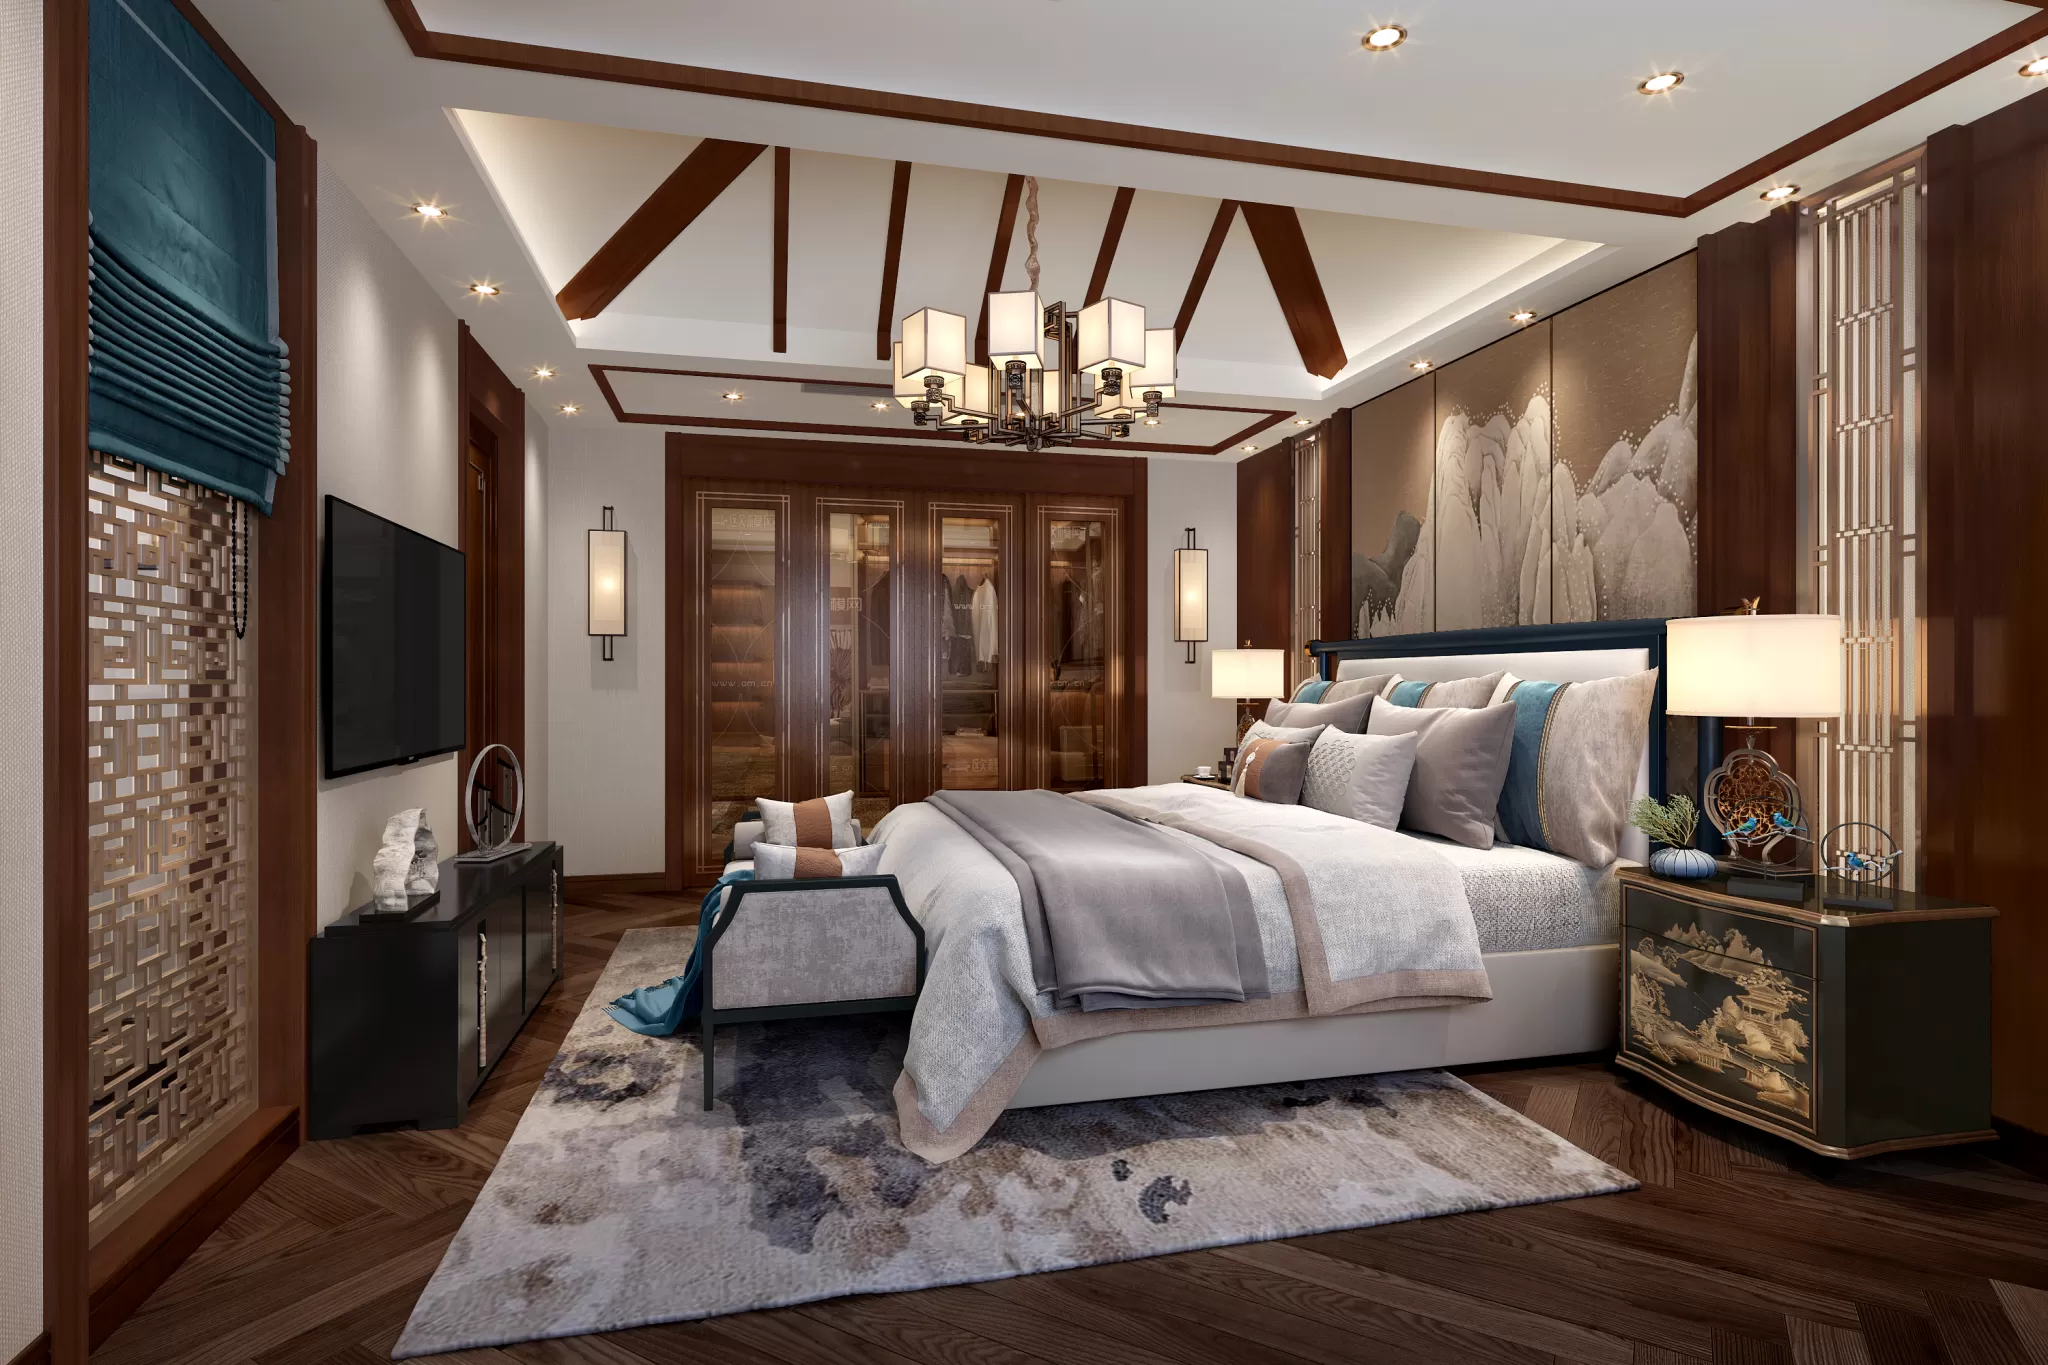 DESMOD INTERIOR 2021 (VRAY)/5. BEDROOM – 2. CHINESE STYLES – 148